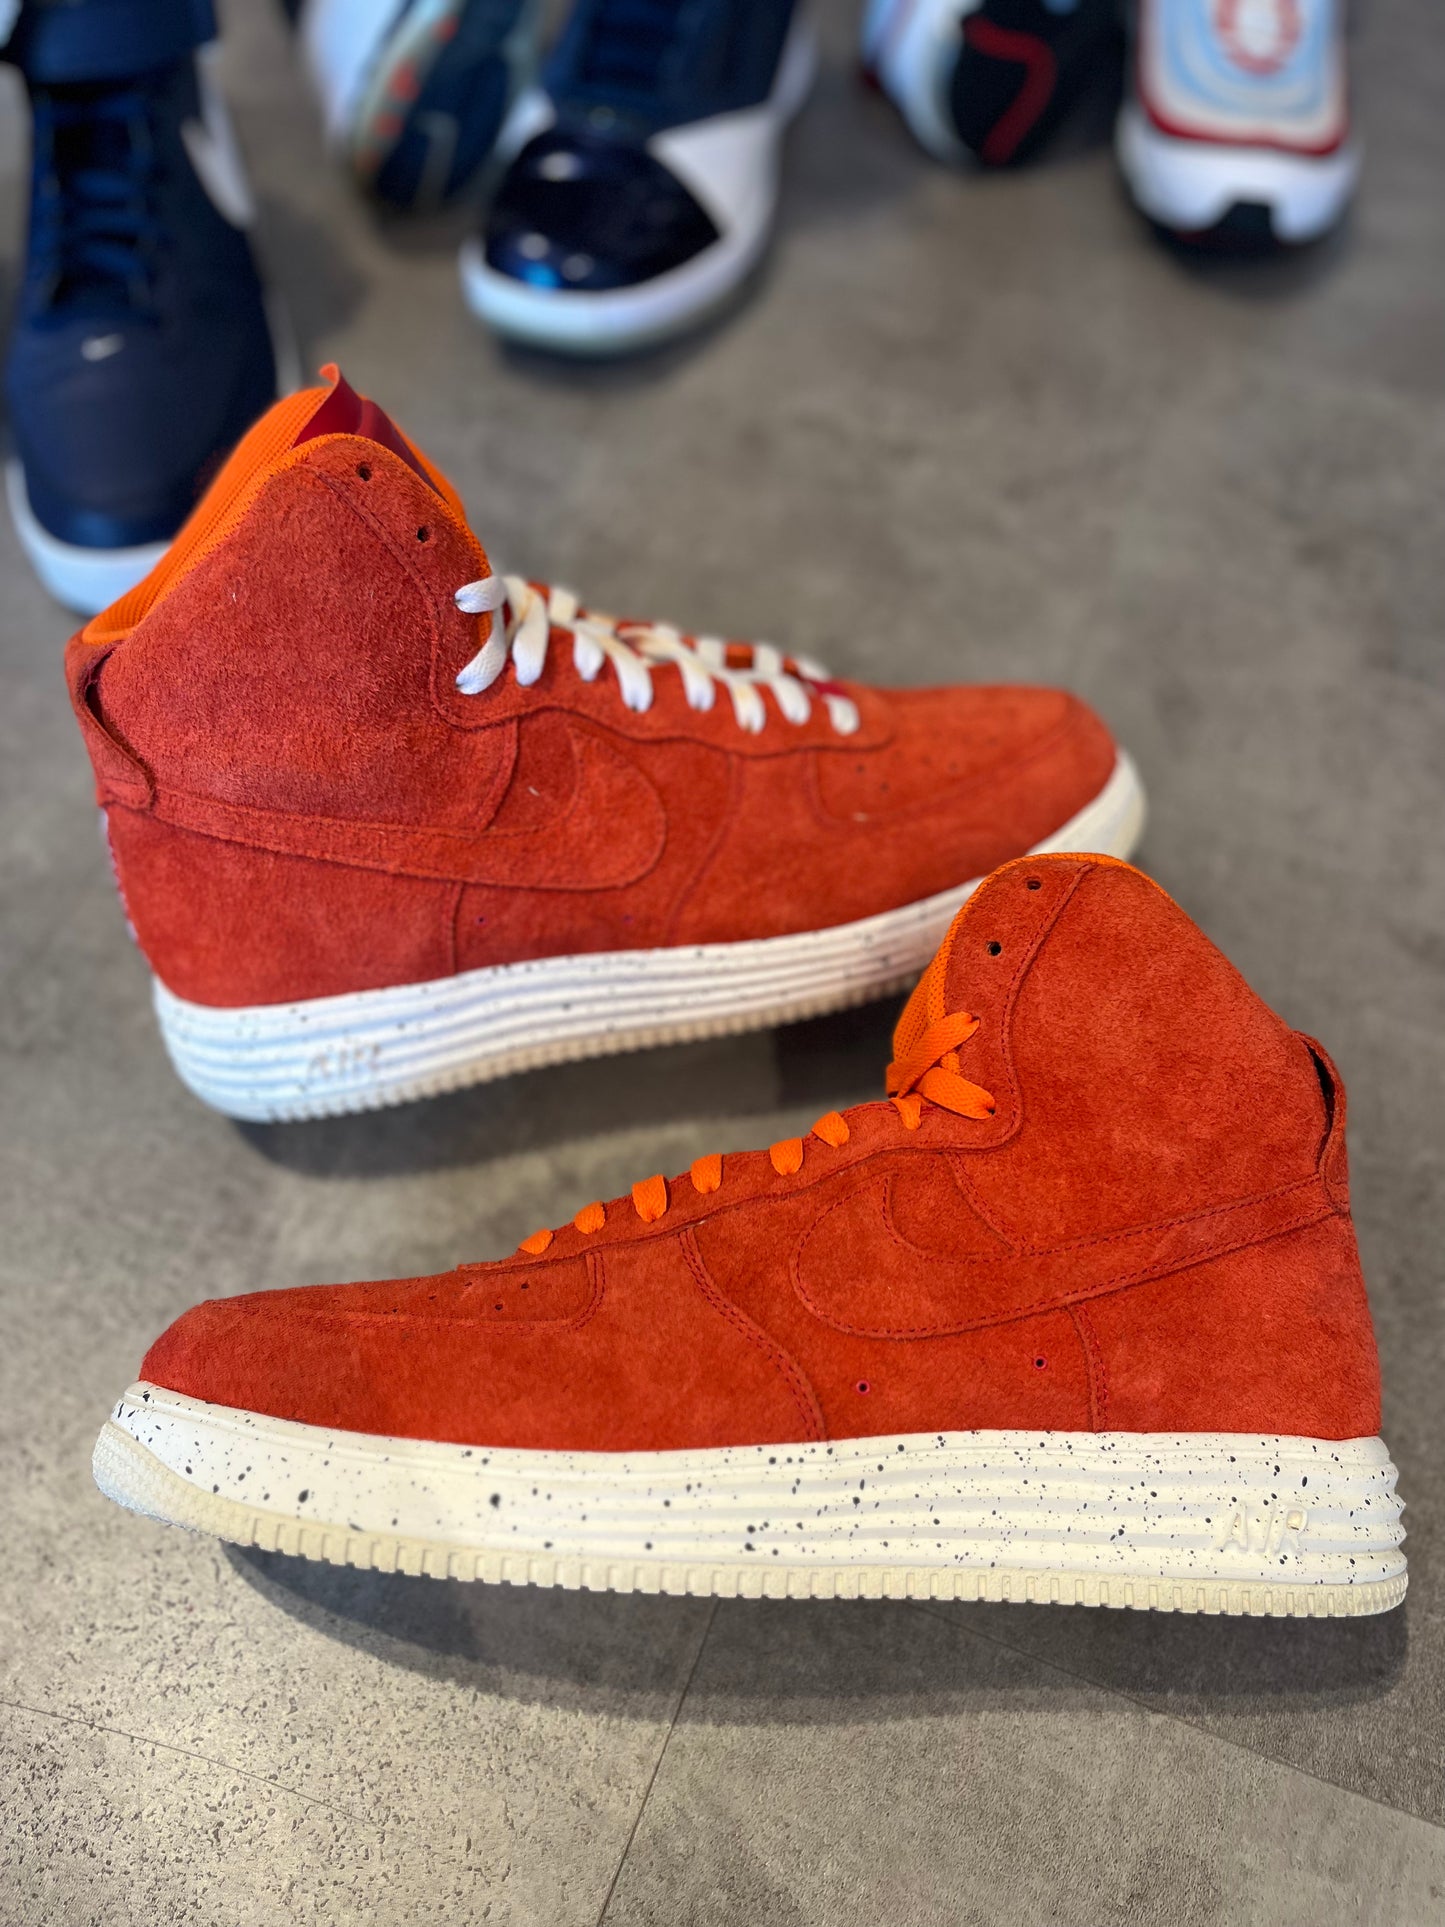 Nike Lunar Force 1 Hi SP Undefeated Red (Preowned)